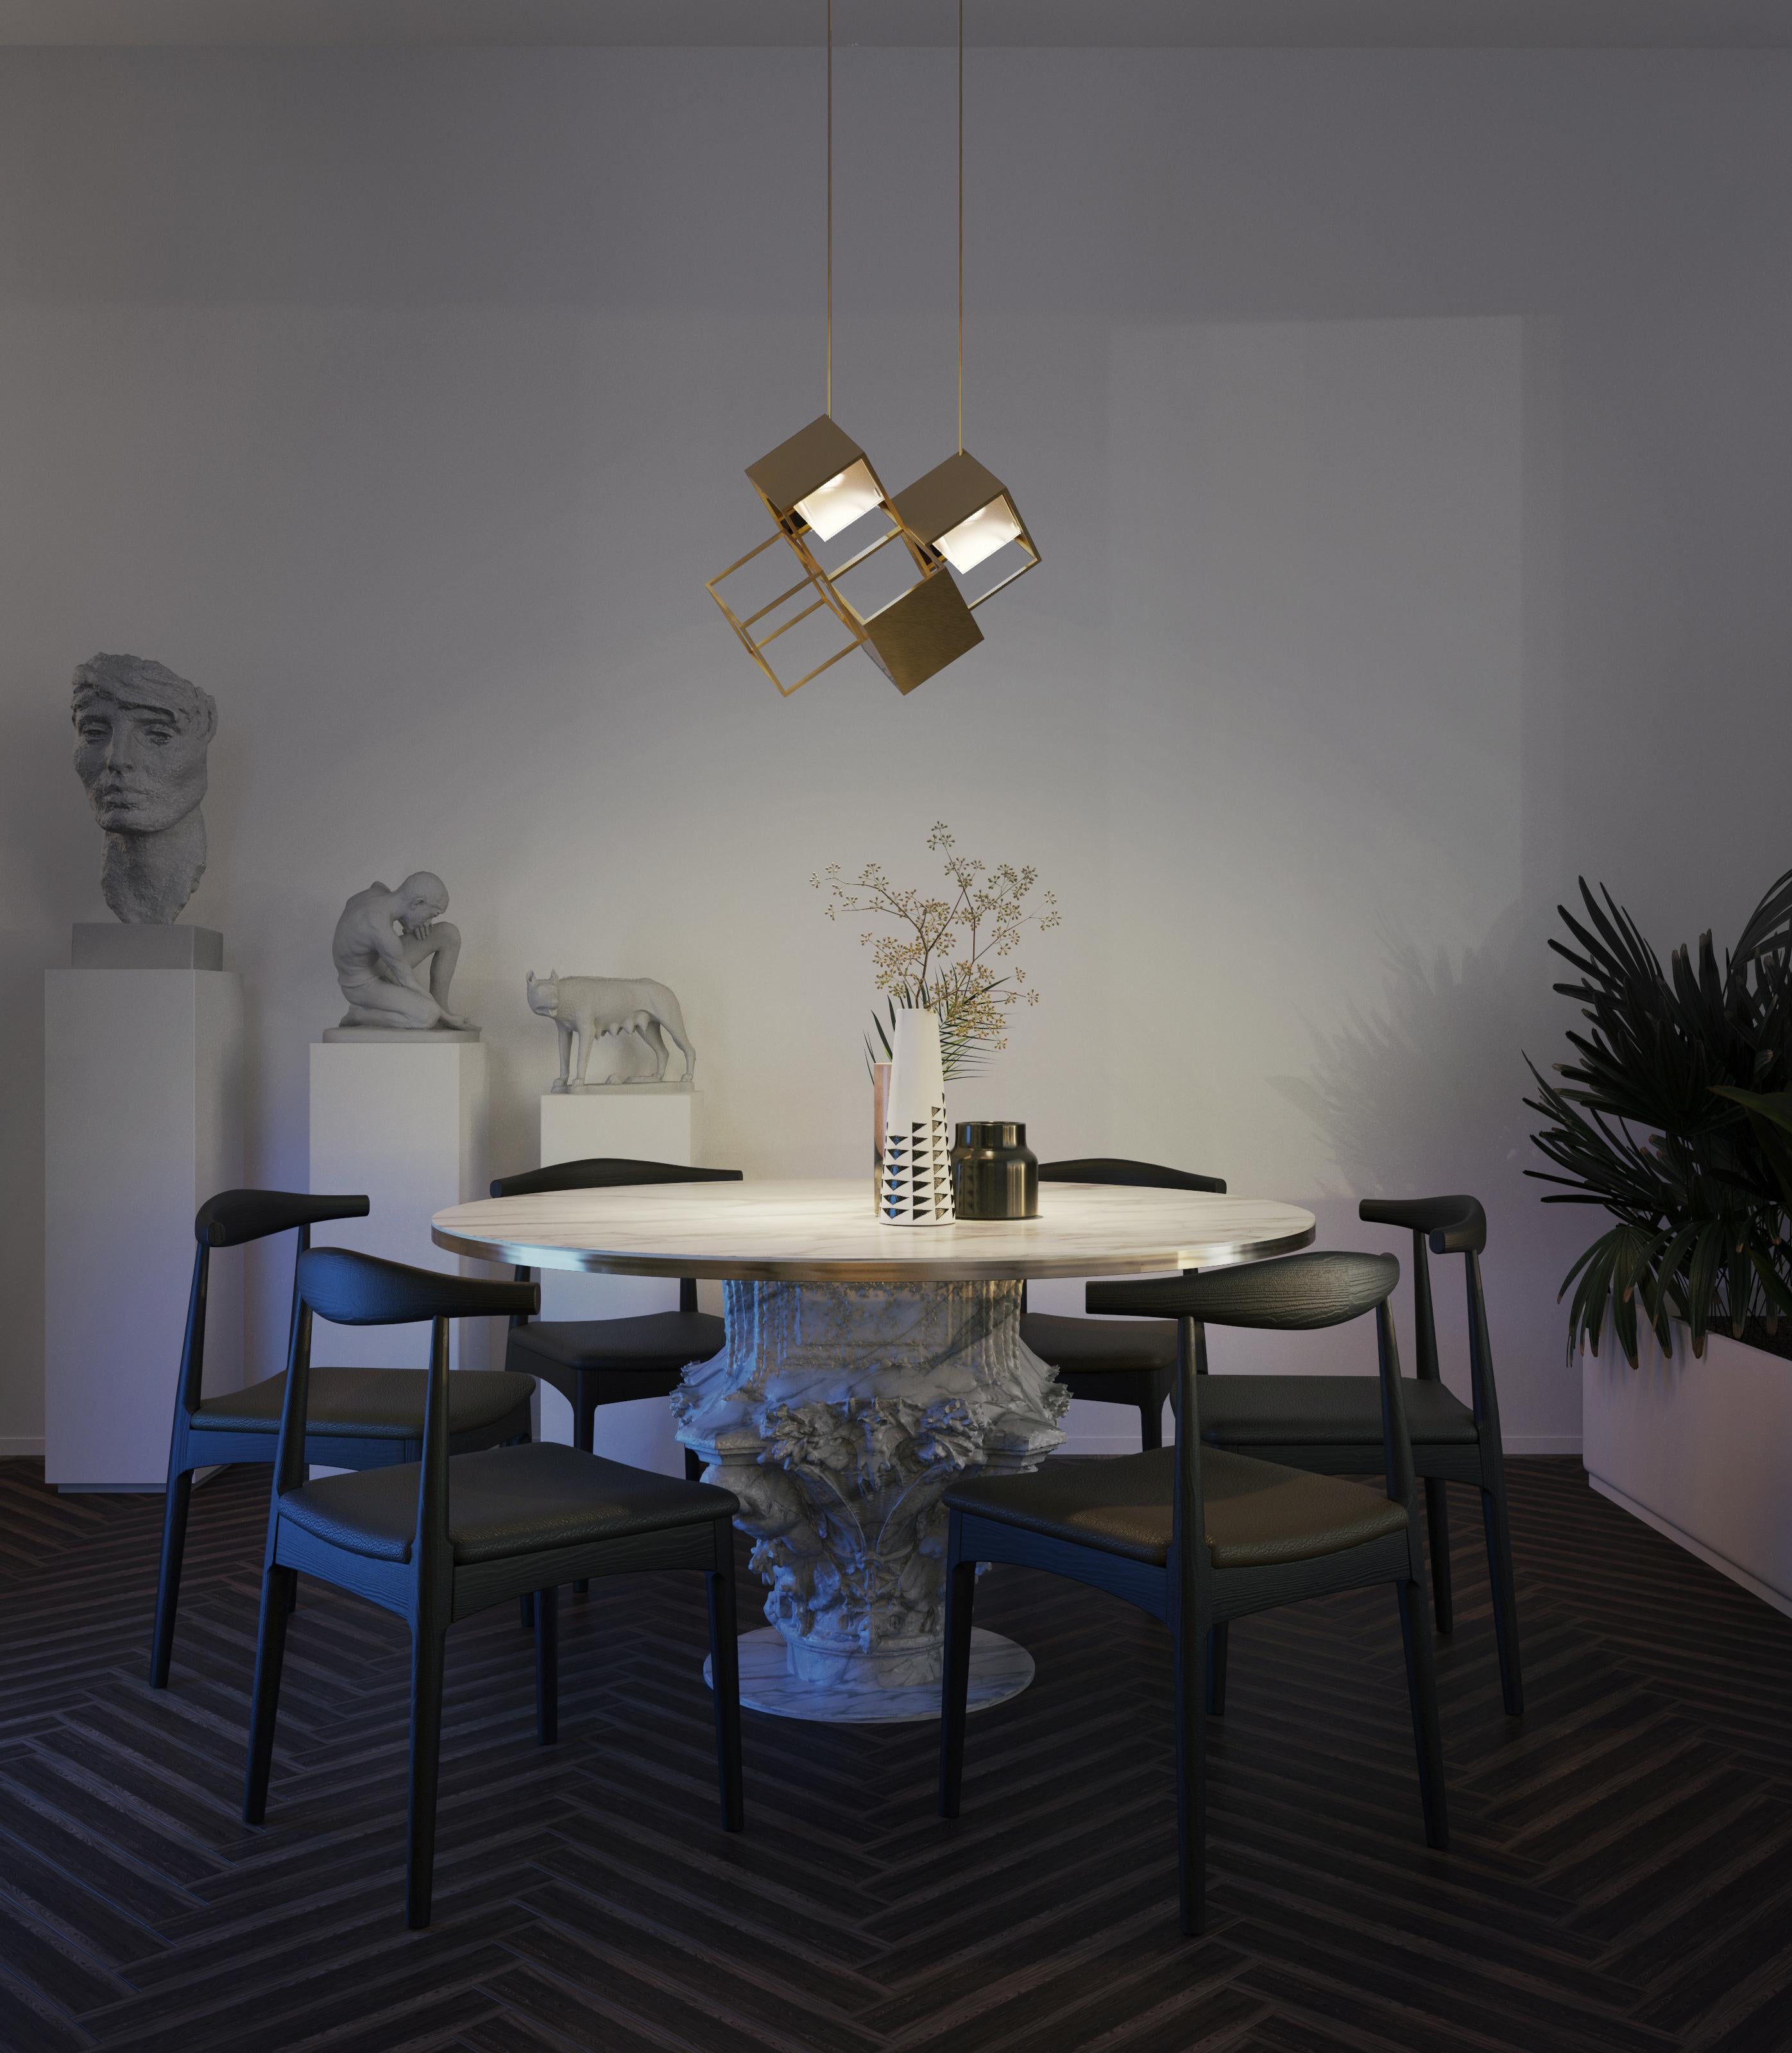 Lattis 4 Chandelier Lighting Brass by Diaphan Studio, REP by Tuleste Factory For Sale 2